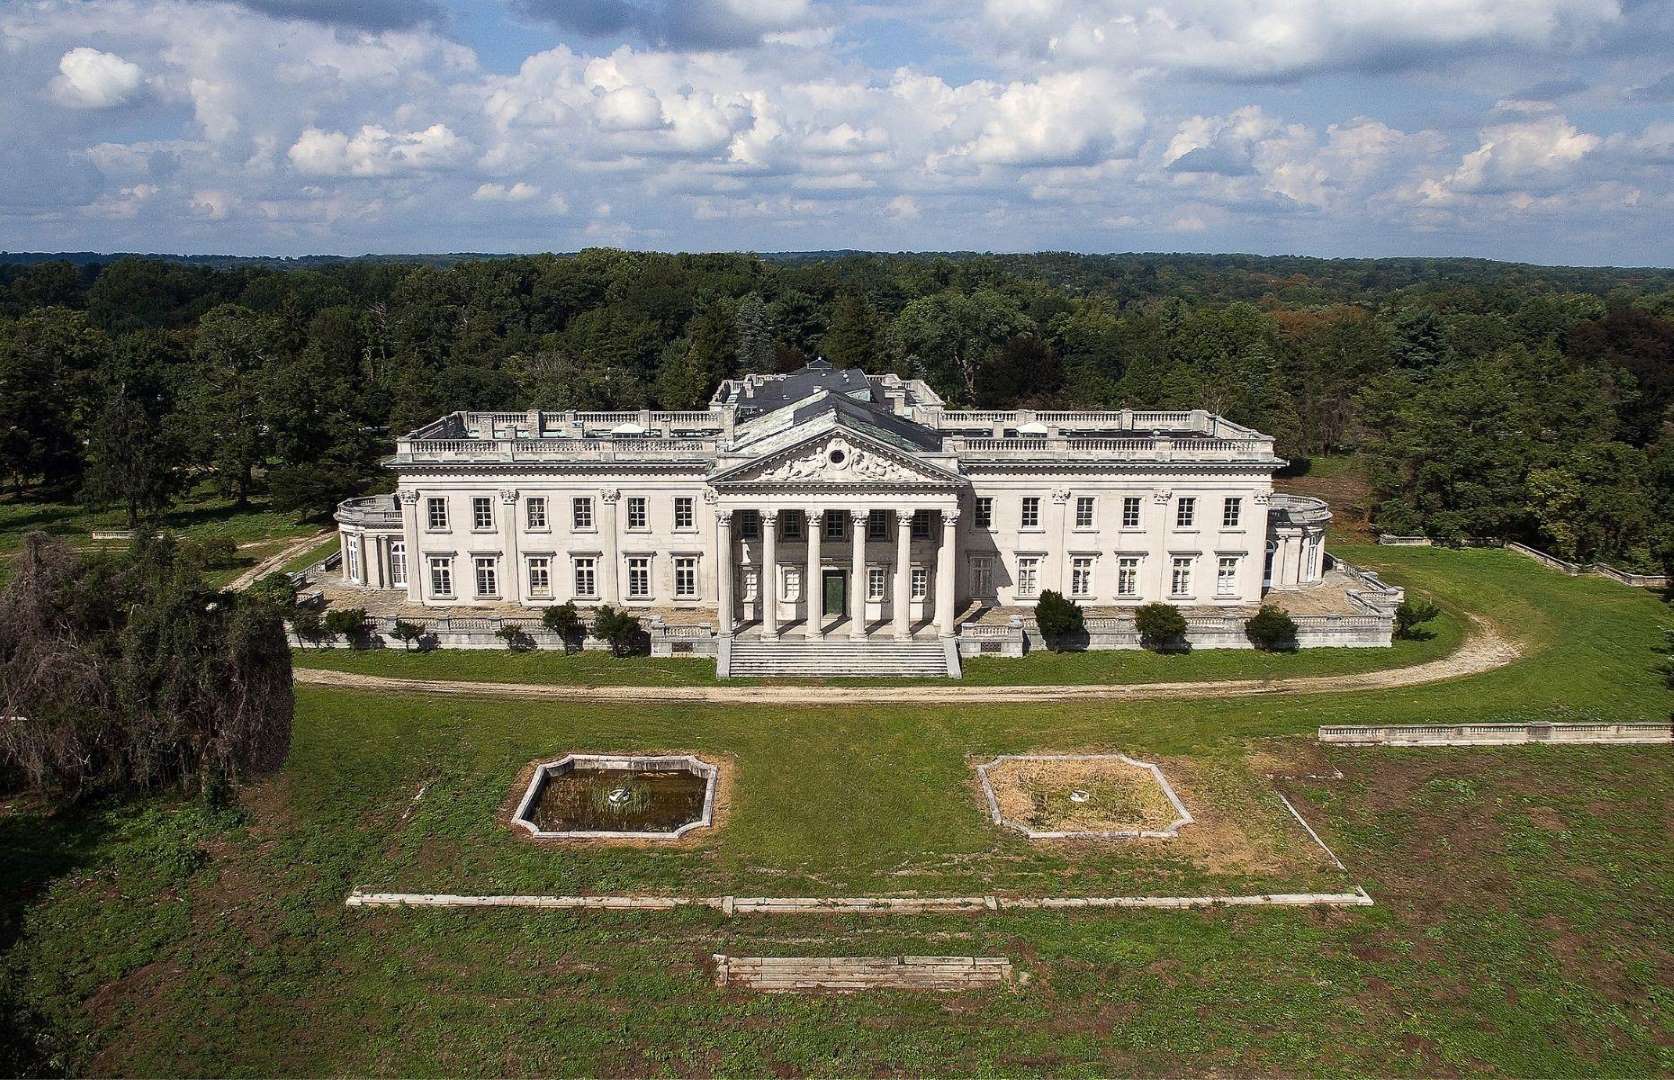 Largest abandoned mansion in USA 70,000sq ft Lynnewood Hall in